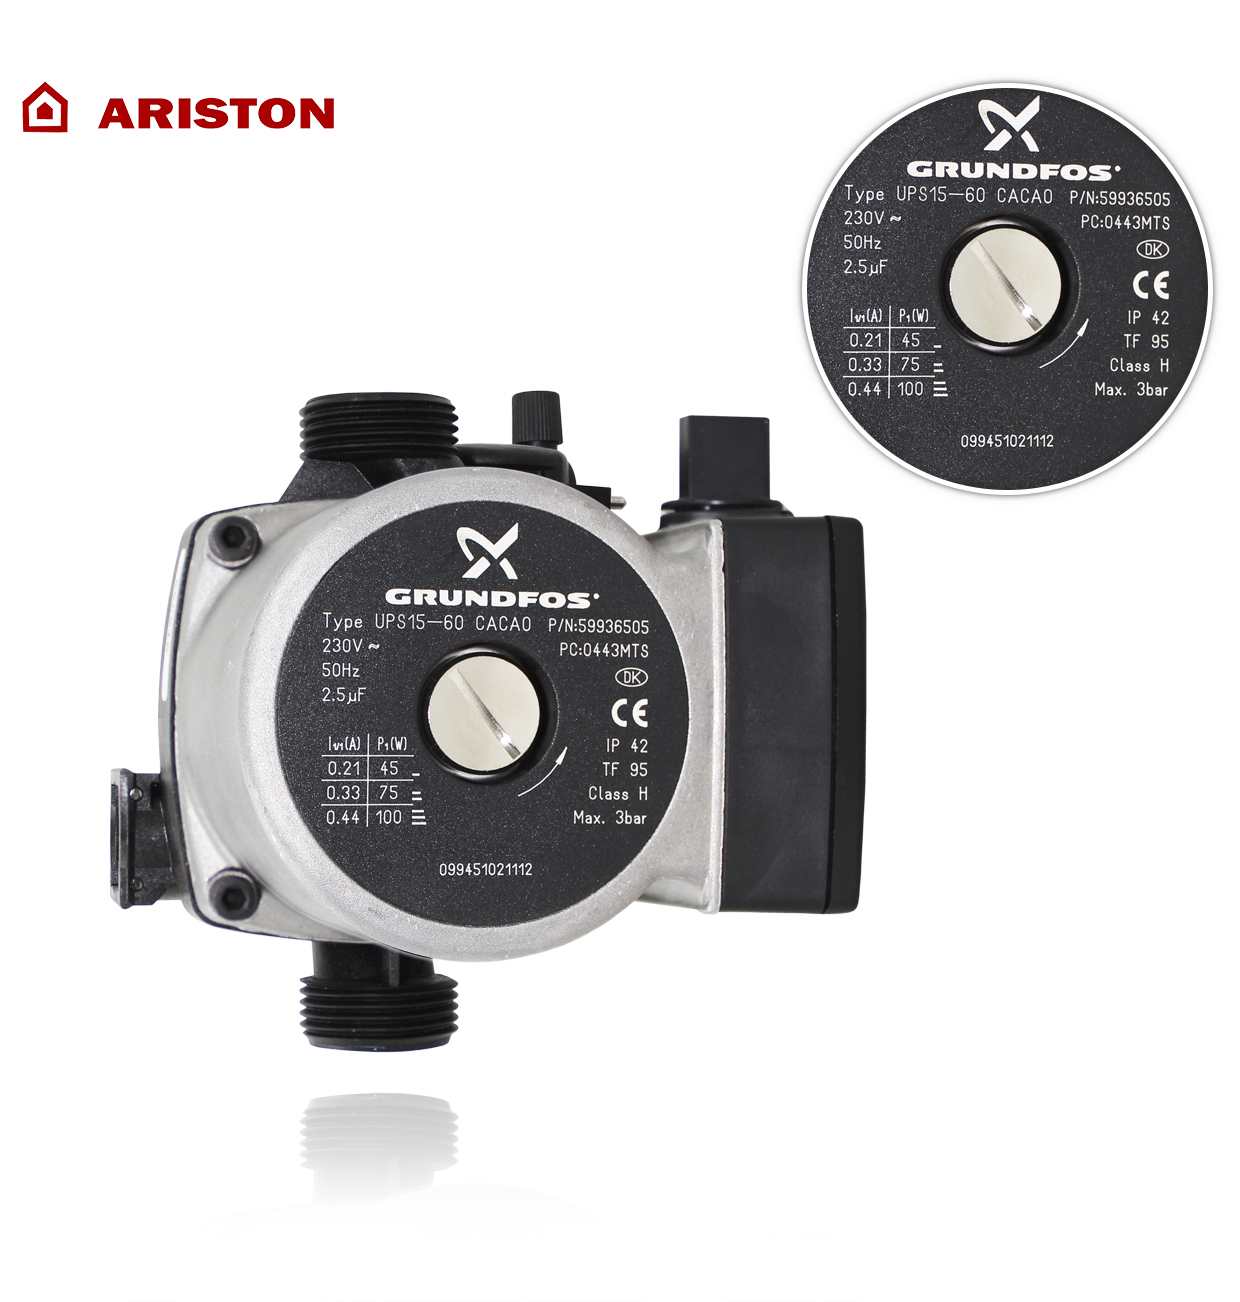 ARISTON 996613 UPS 15-50 CACAO 100W VERTICAL 1 CONNECTION PUMP KIT+JOLLY  NEW GENUS